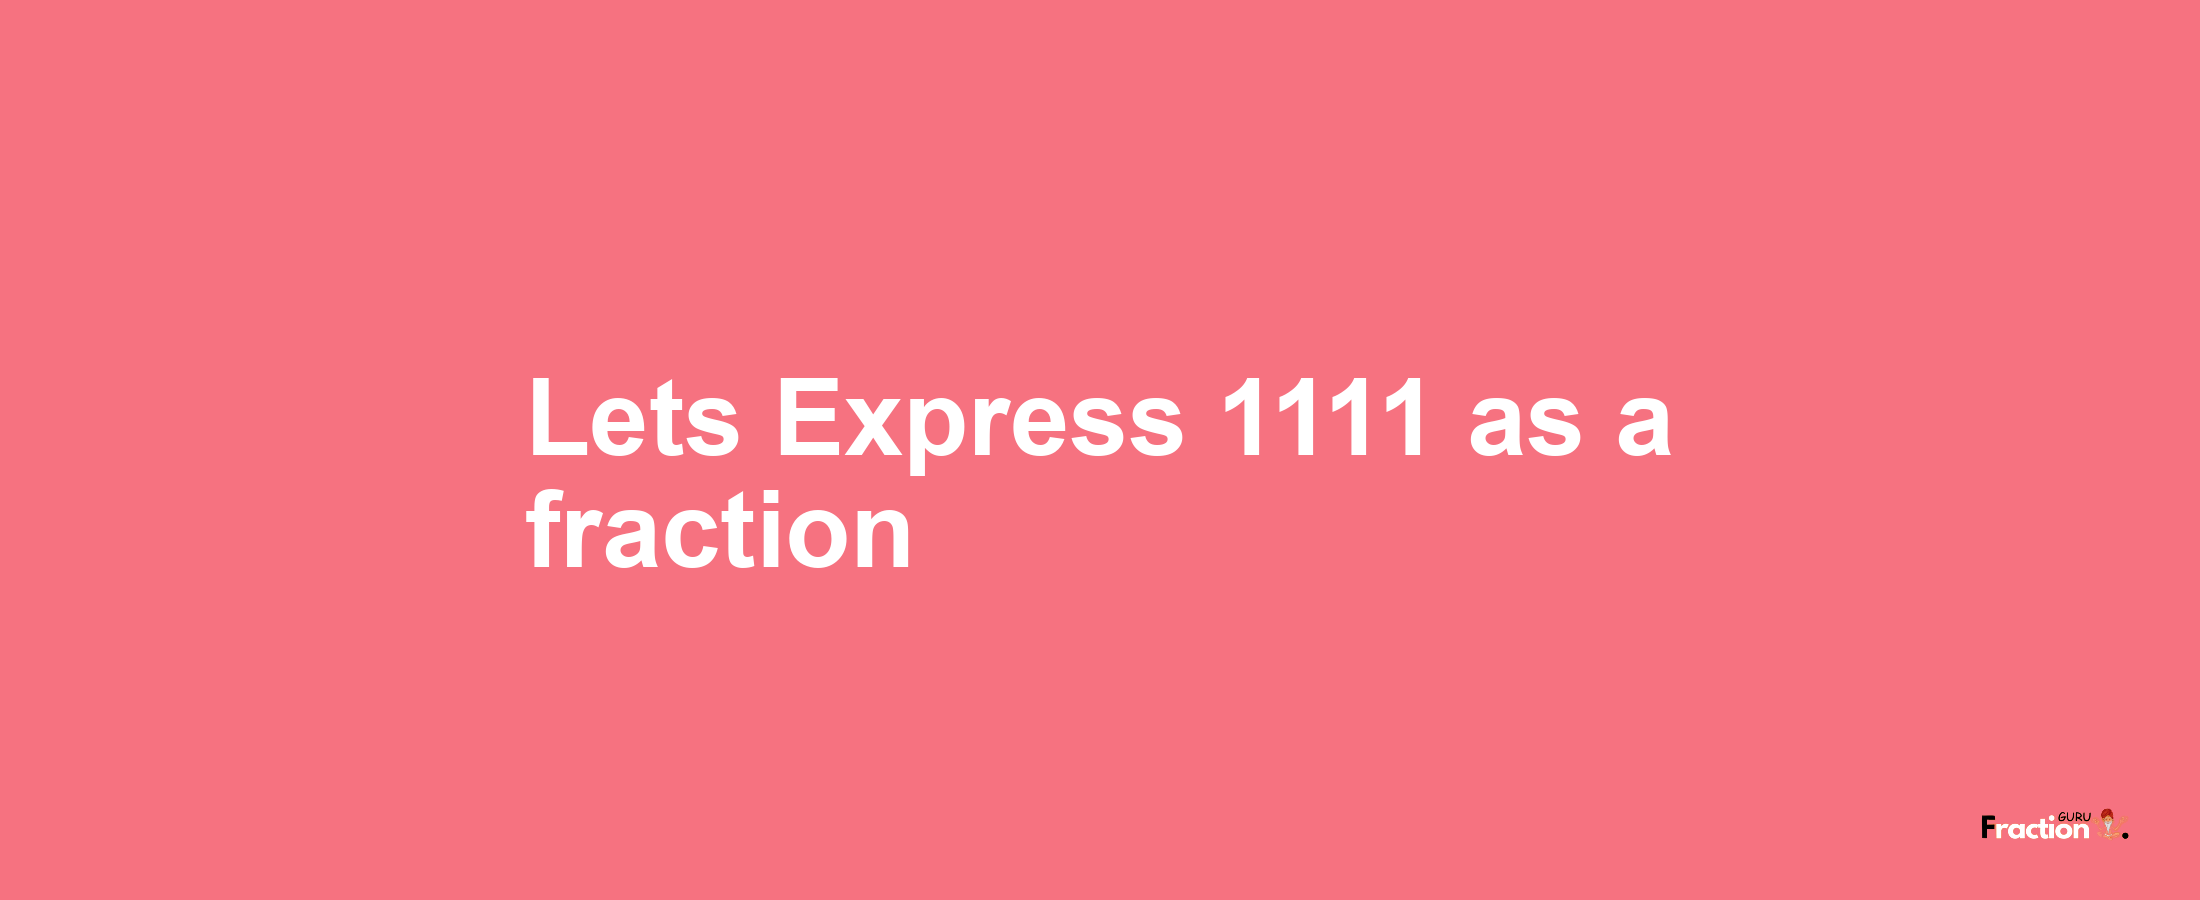 Lets Express 1111 as afraction